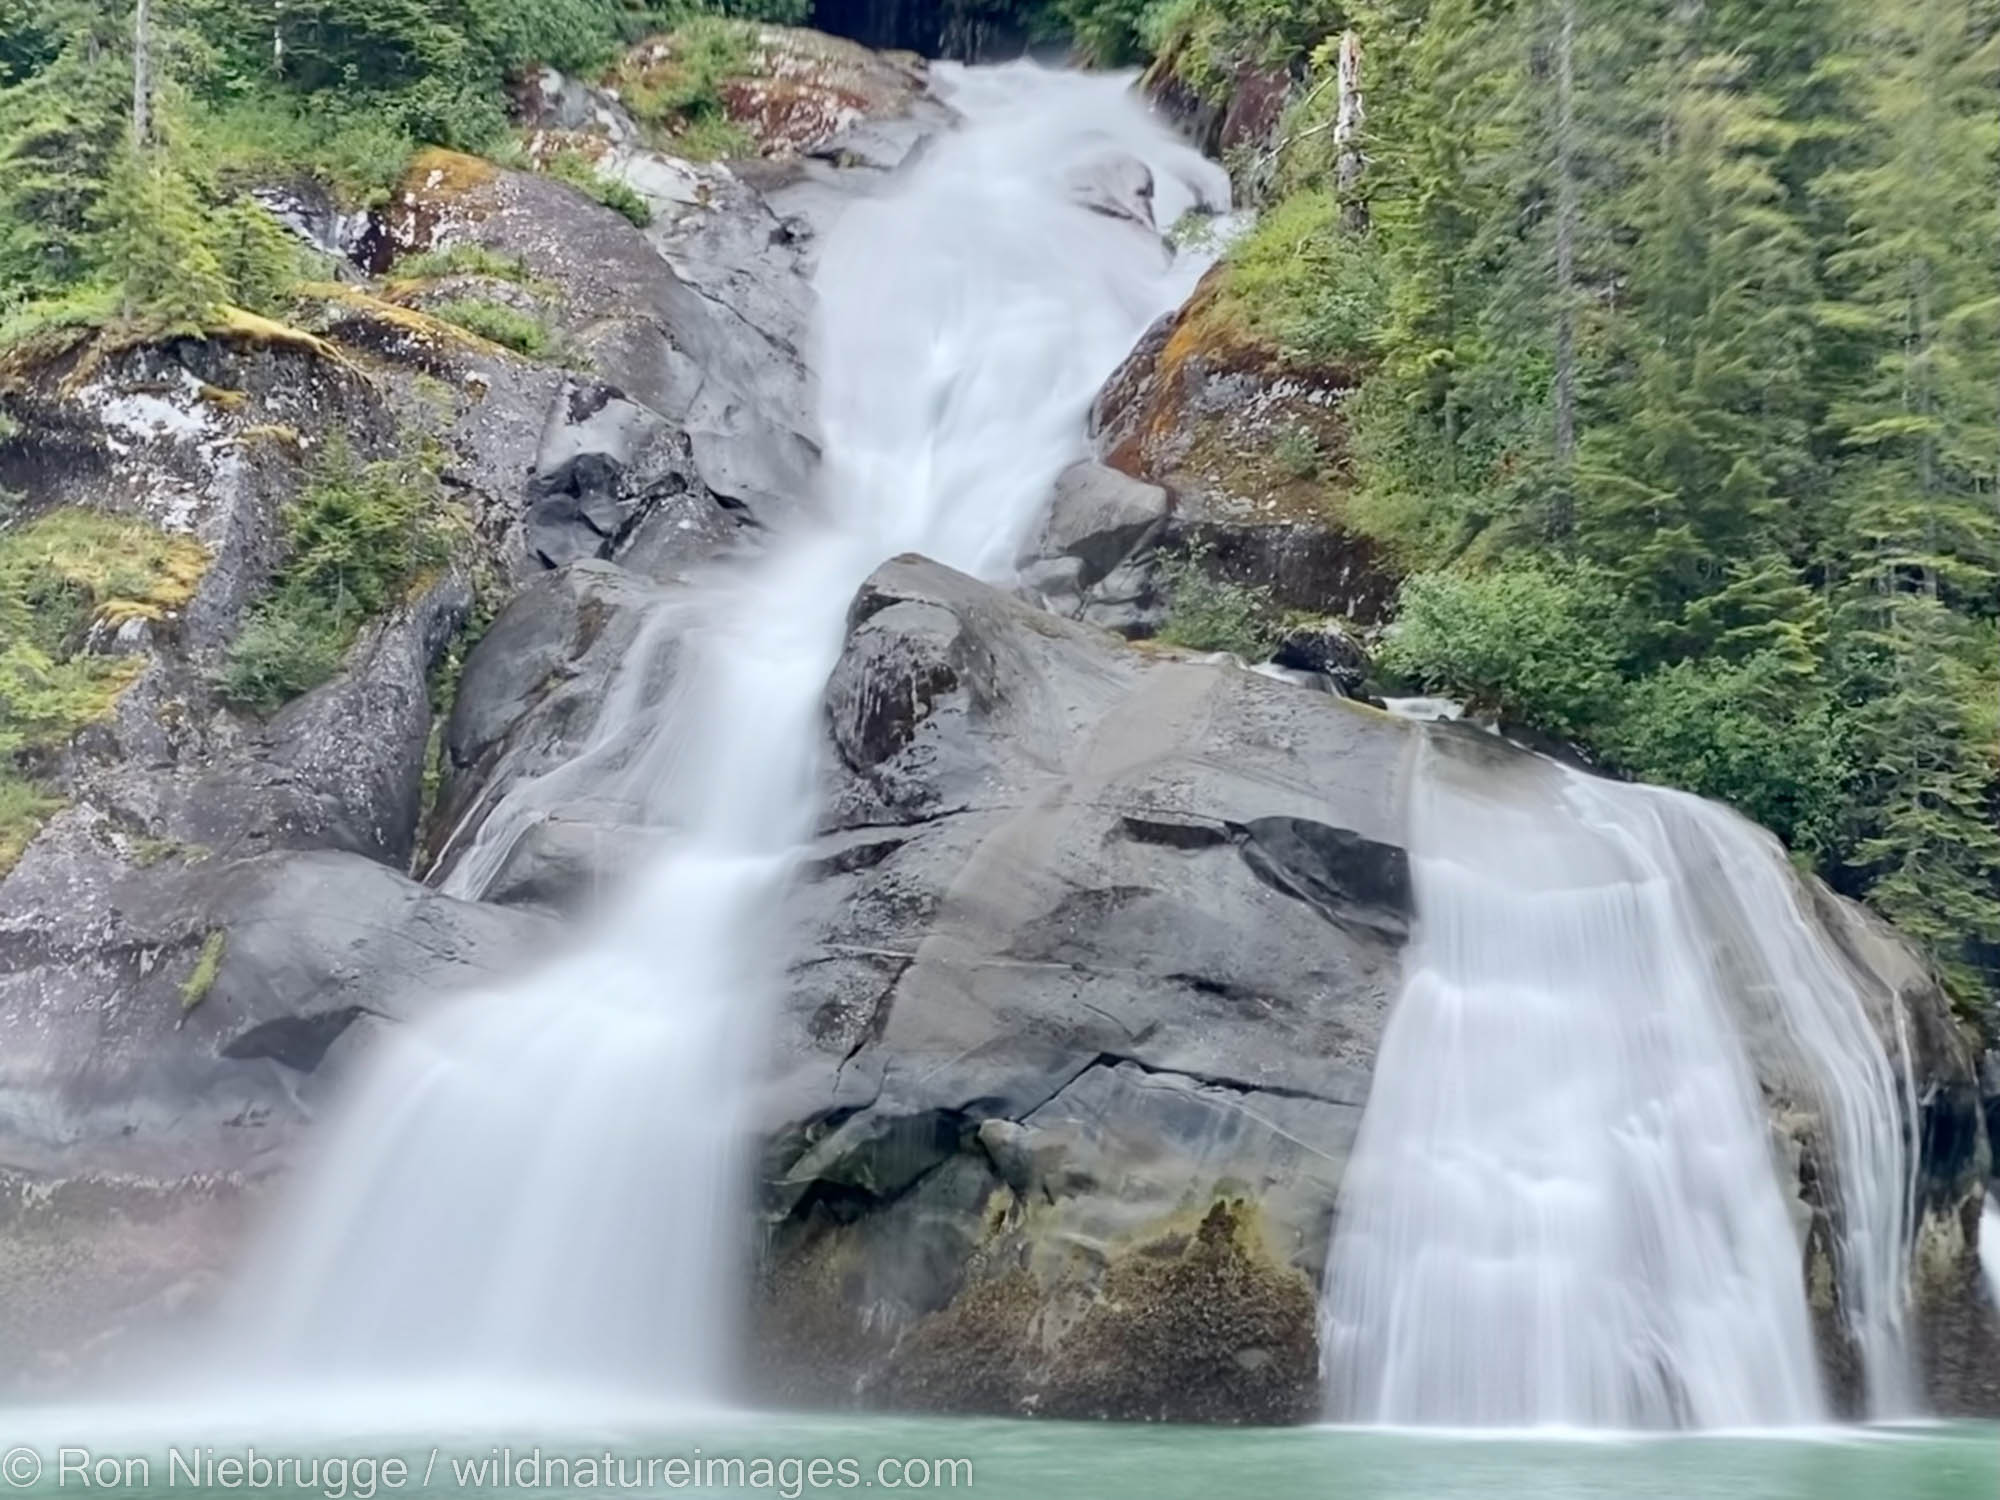 Waterfall in Tracy Arm, Tongass National Forest, Alaska.  Iphone photo.